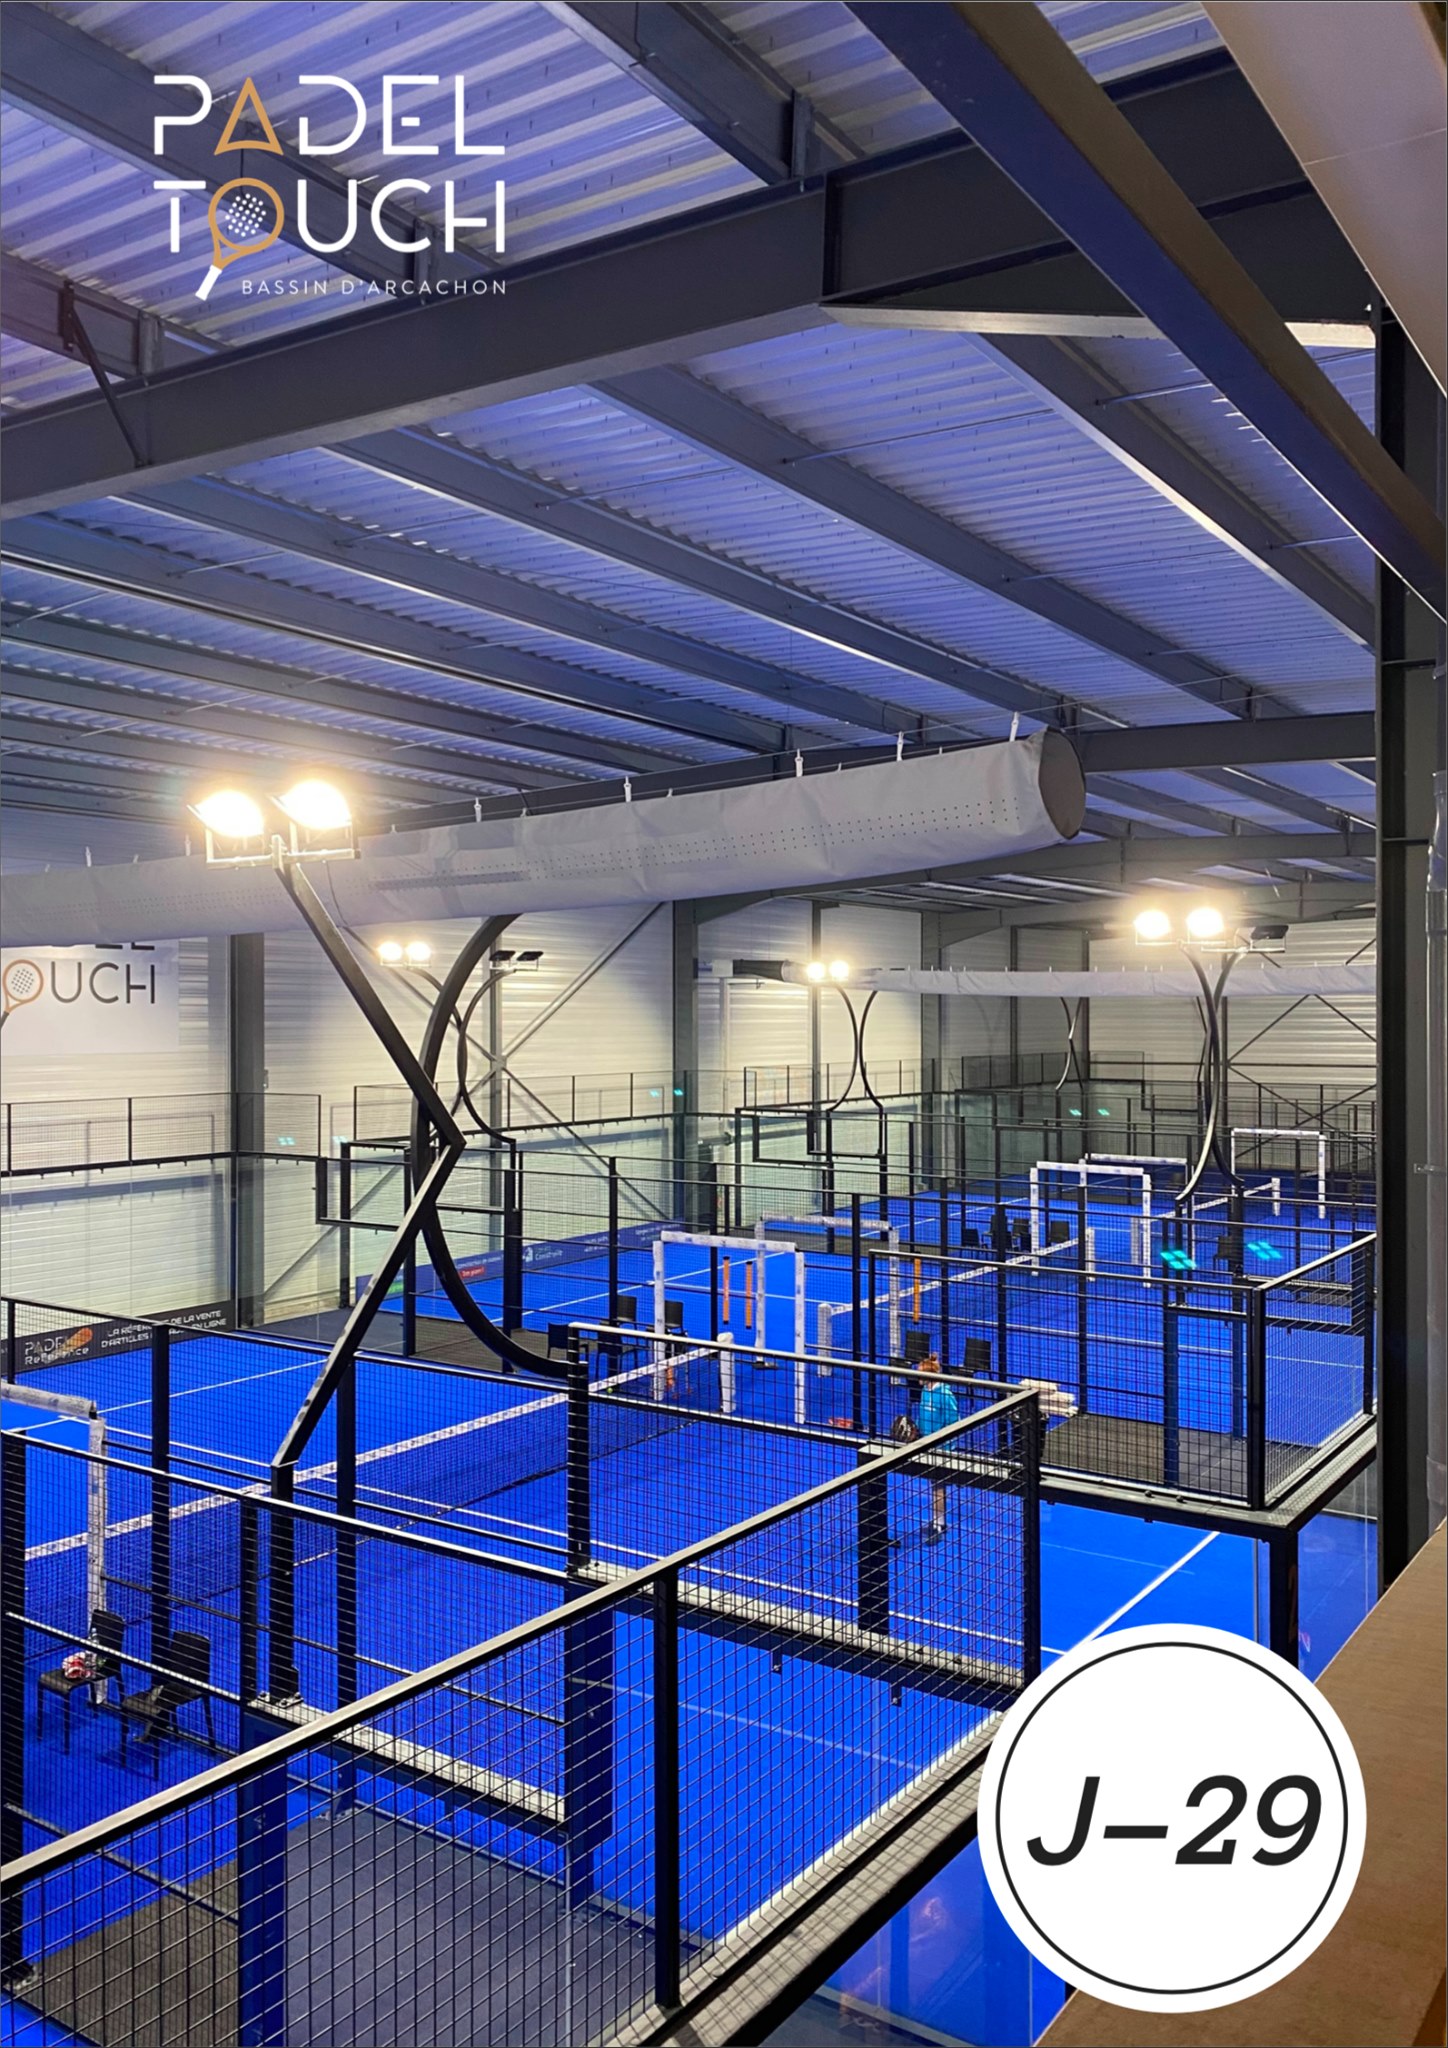 Padel Touch puts the air conditioning in its center!